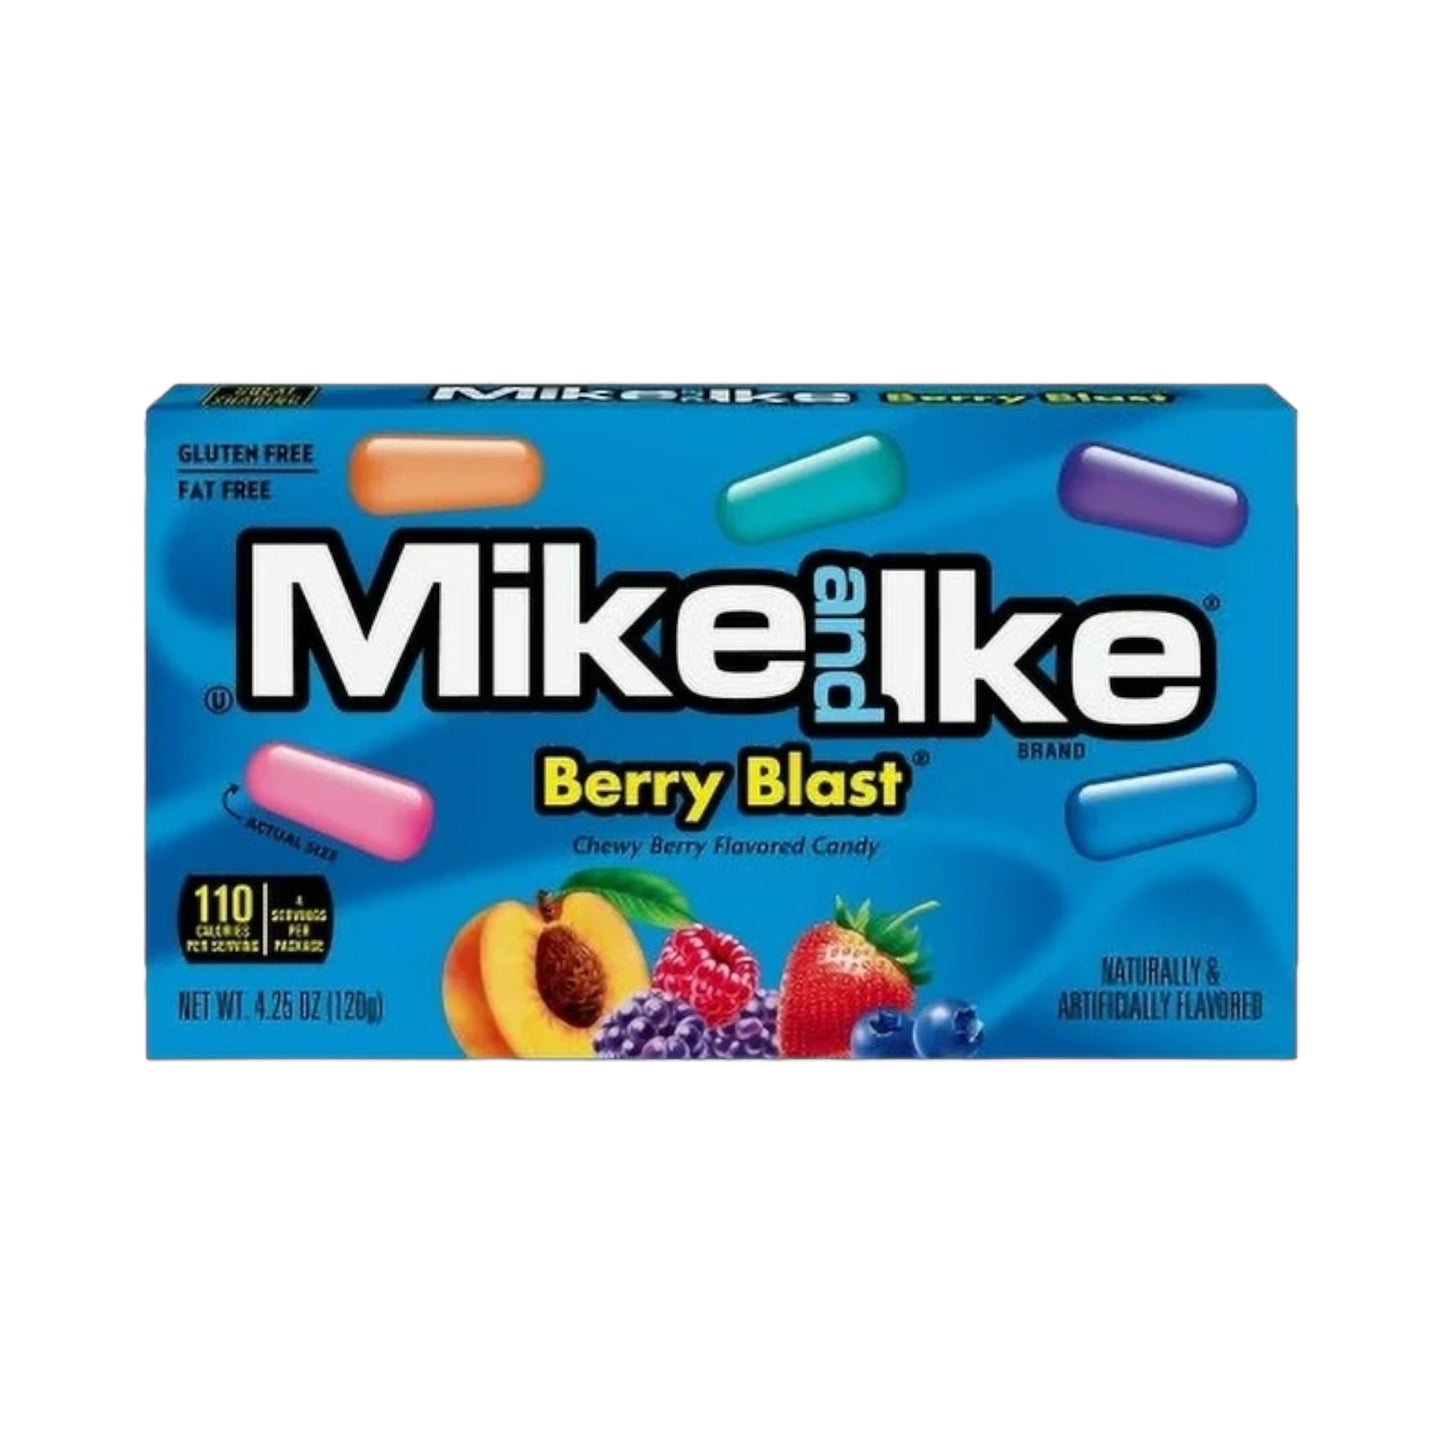 Mike And Ike Berry Blast - 4.25oz (120g) - Theater Box